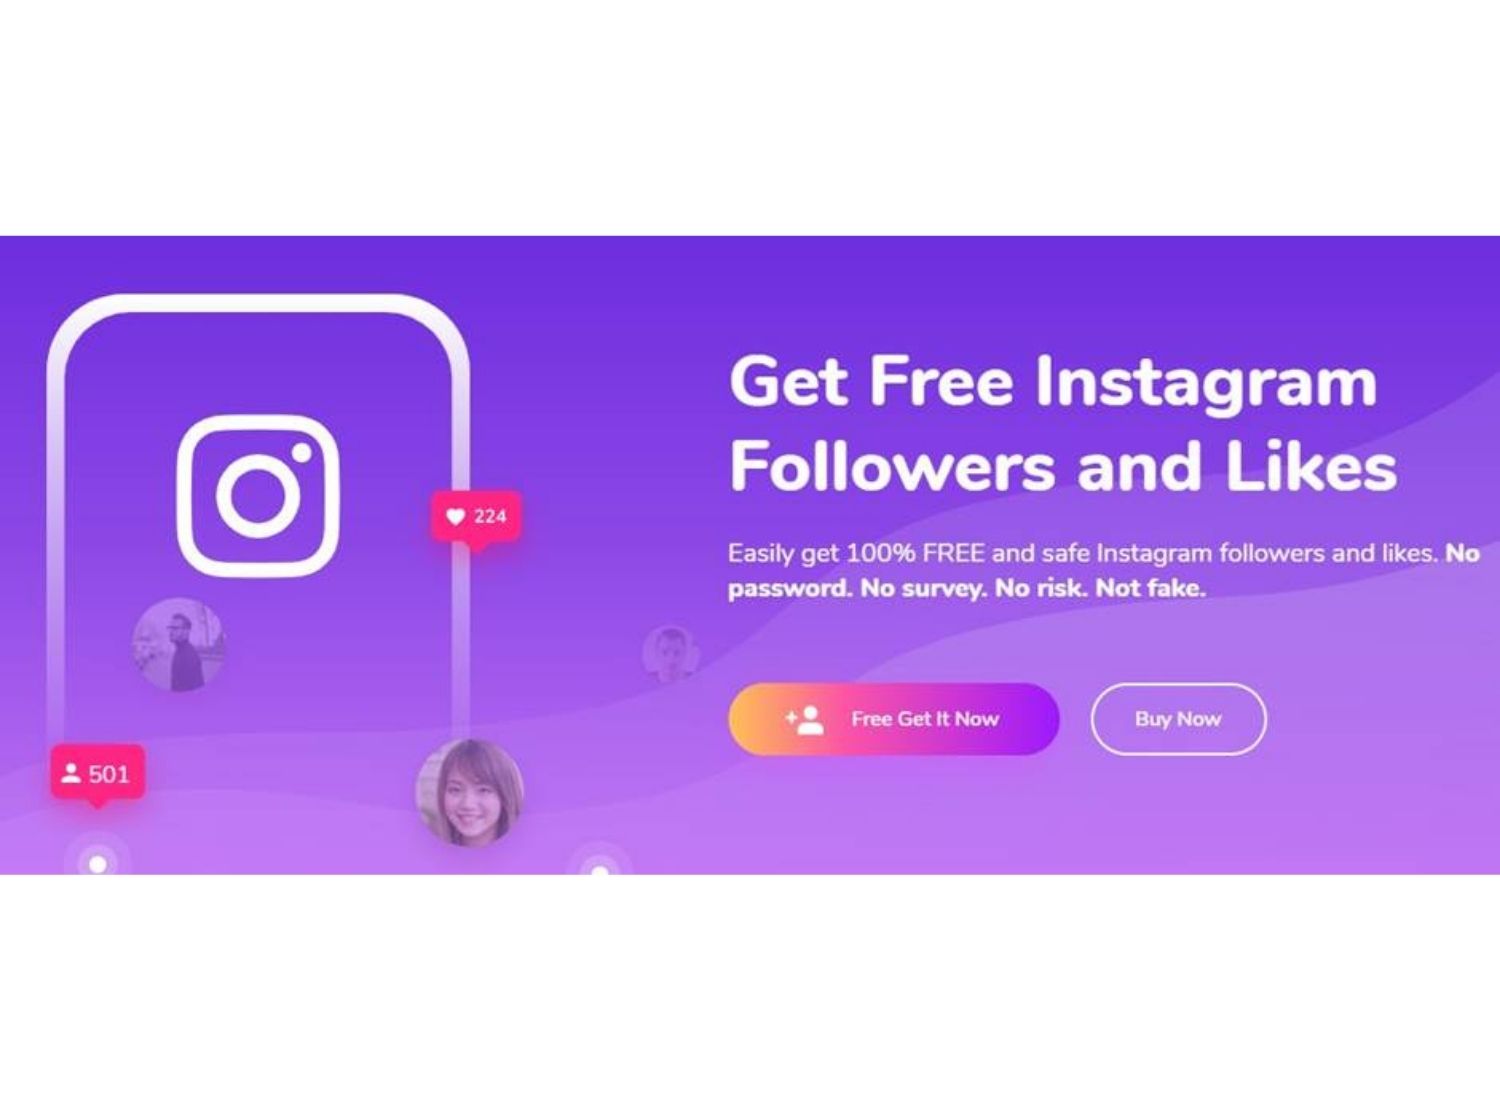 The Fastest Way to Get Free Instagram Followers in One Click